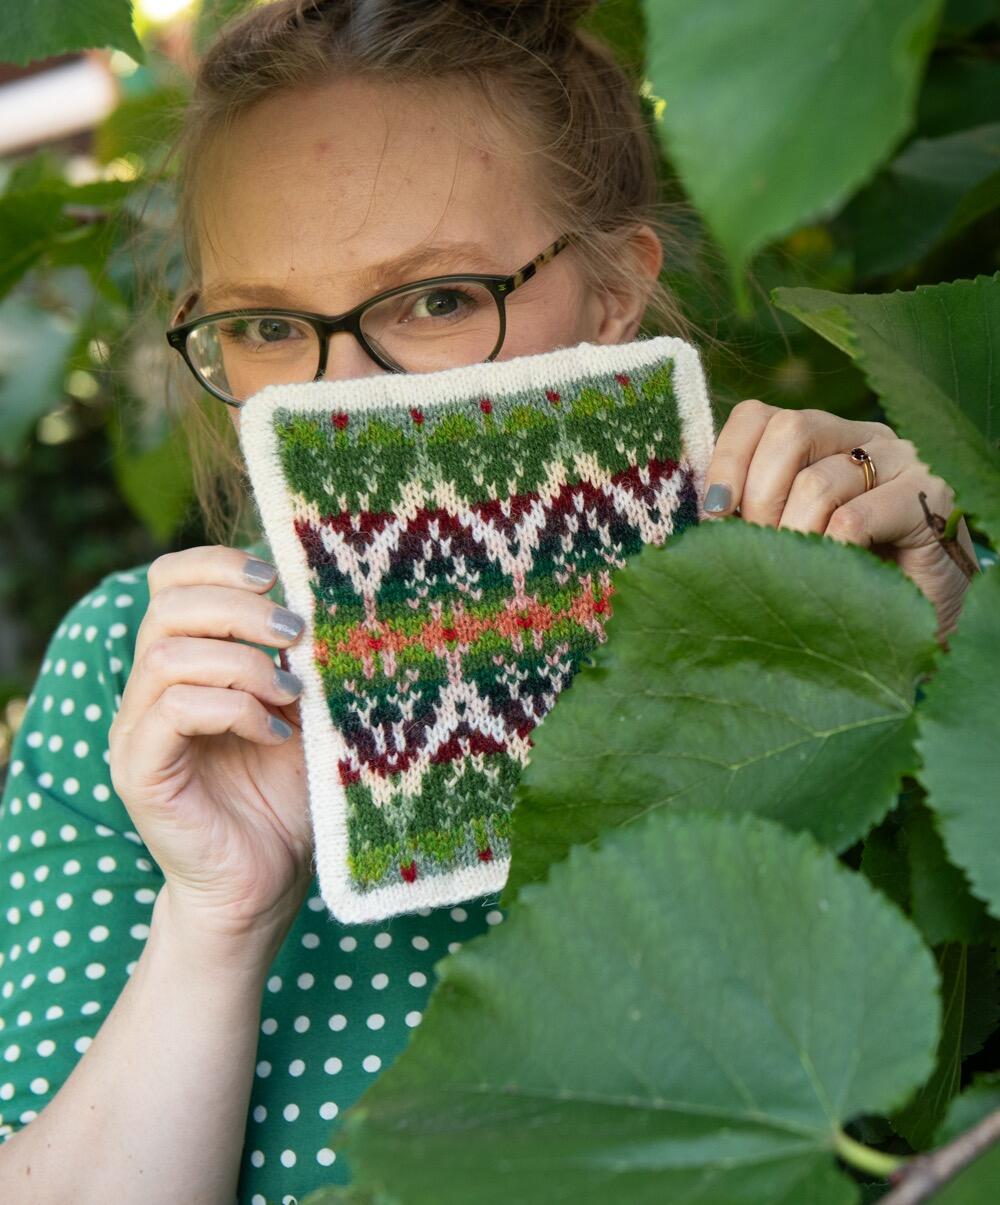 Felix peeps out of her Mulberry tree, holding up a postcard inspired by its leaves and fruits